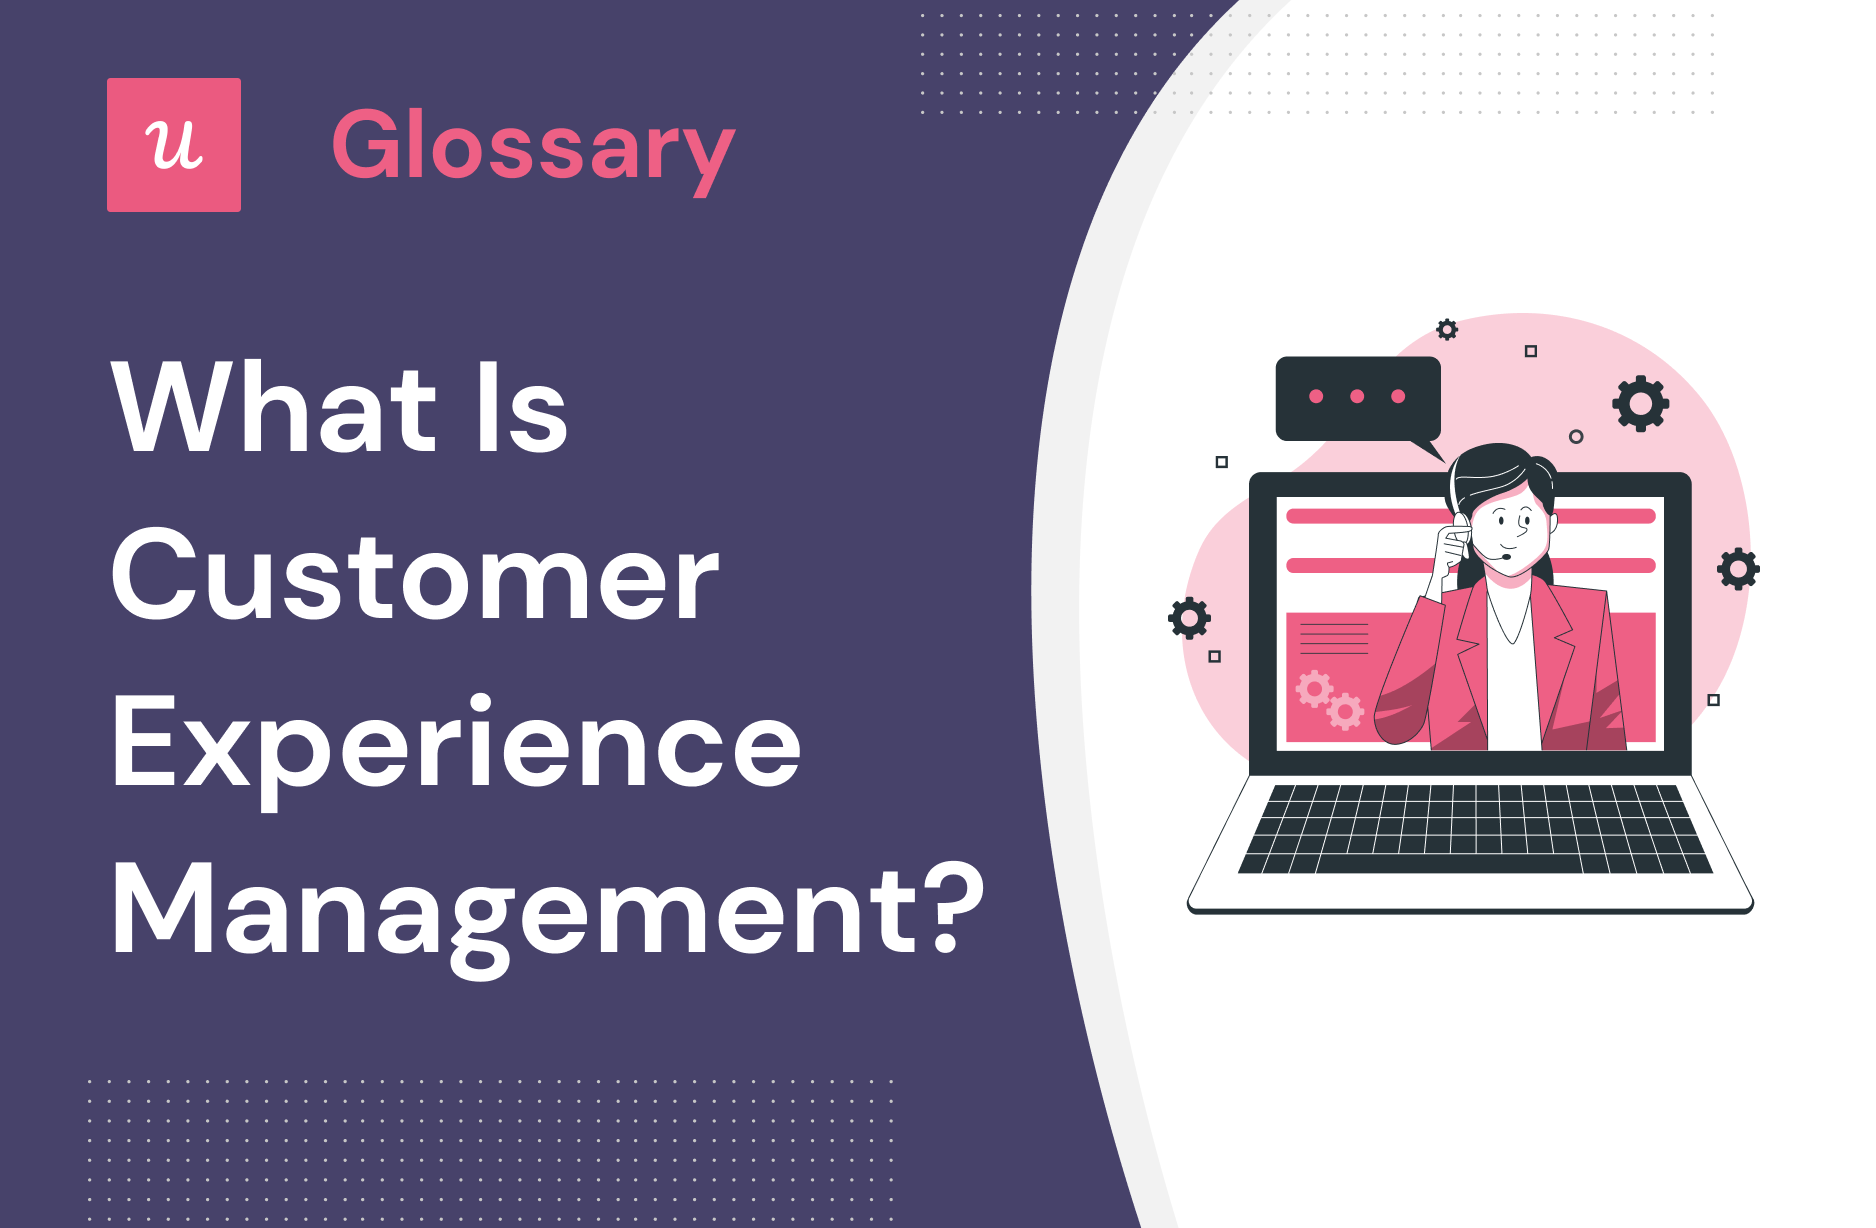 What is Customer Experience Management?